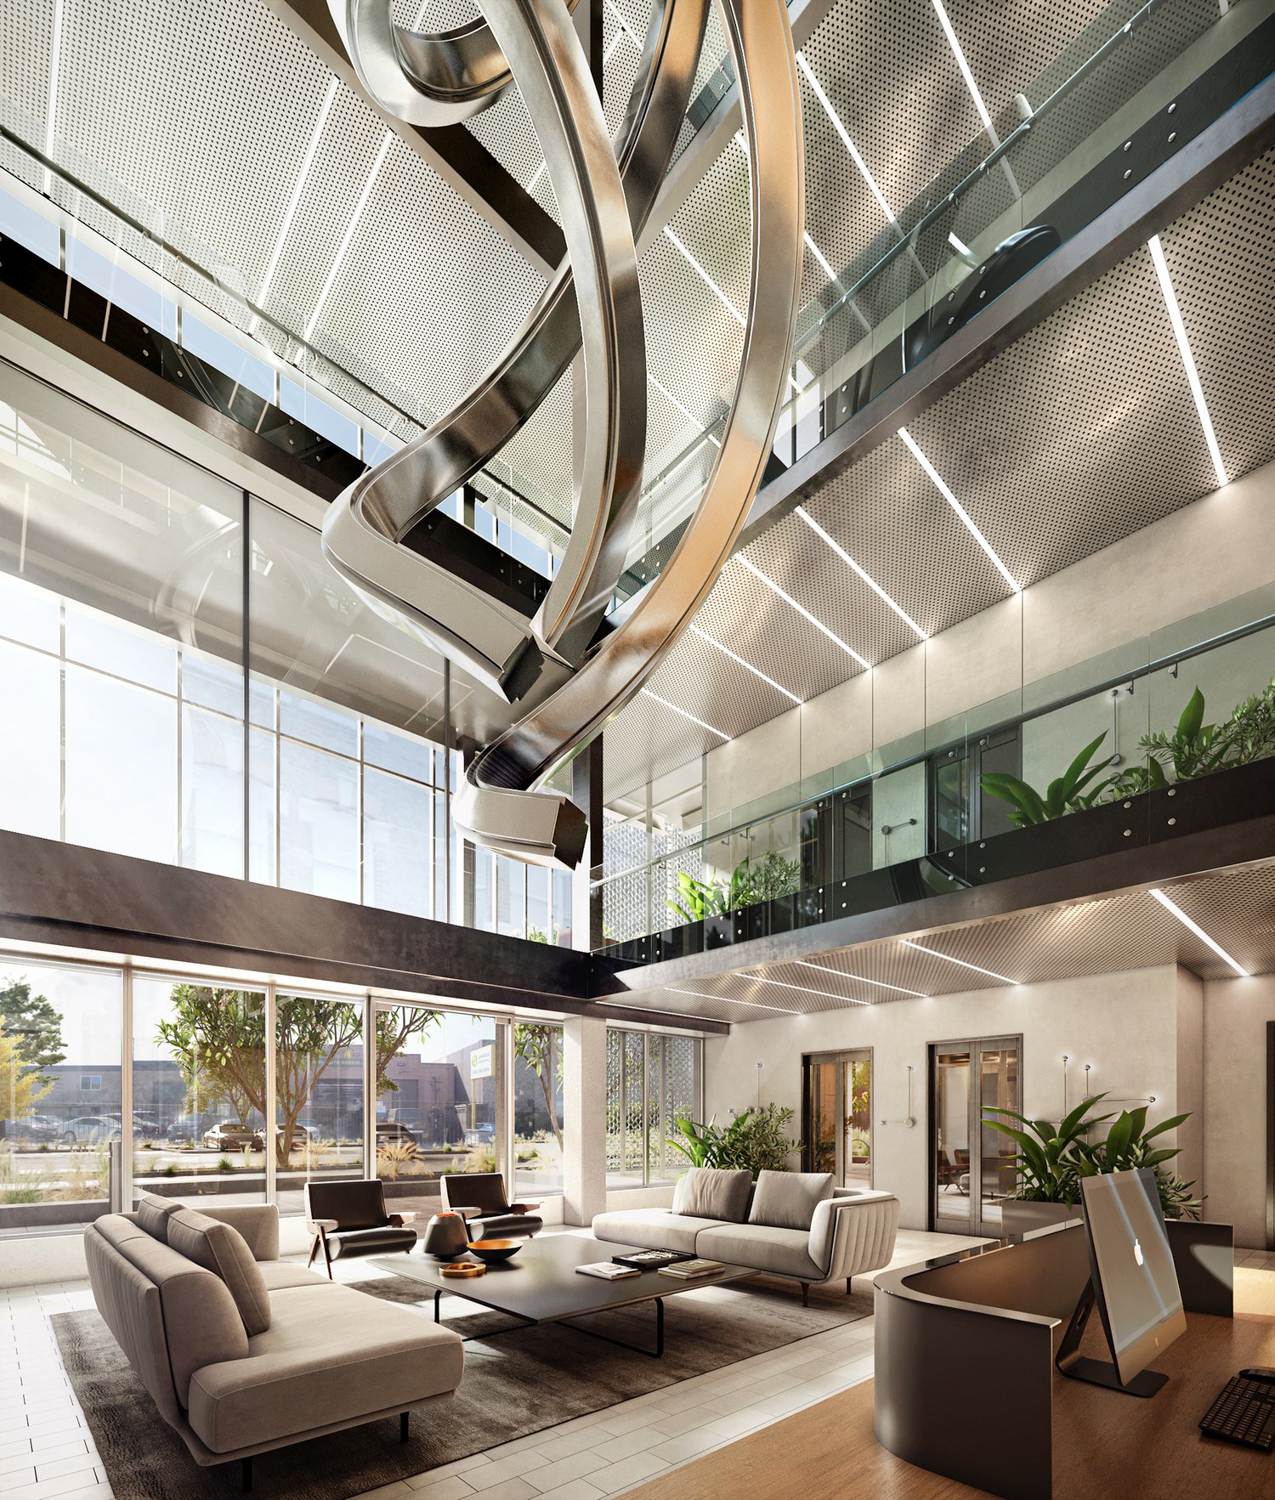 777 Industrial Road lobby interior, rendering by Stanton Architecture